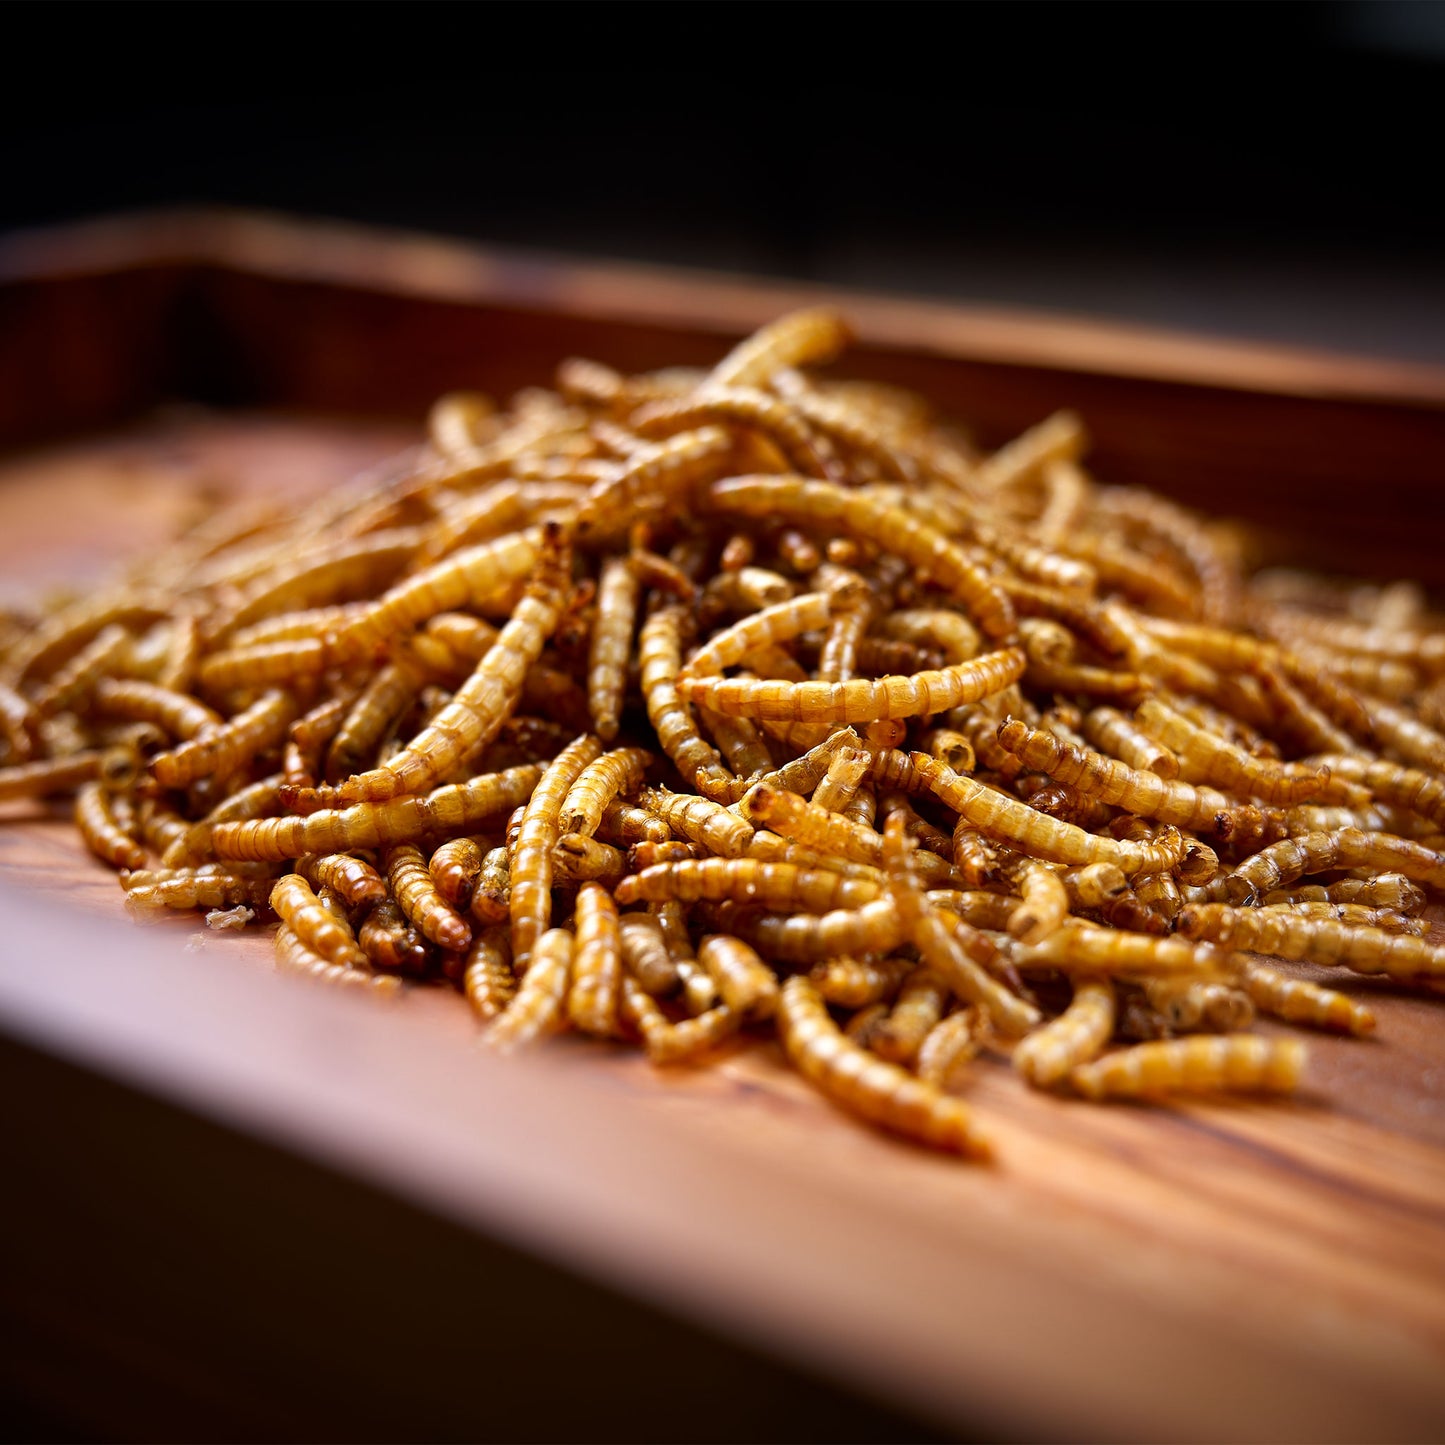 Mealworms pile